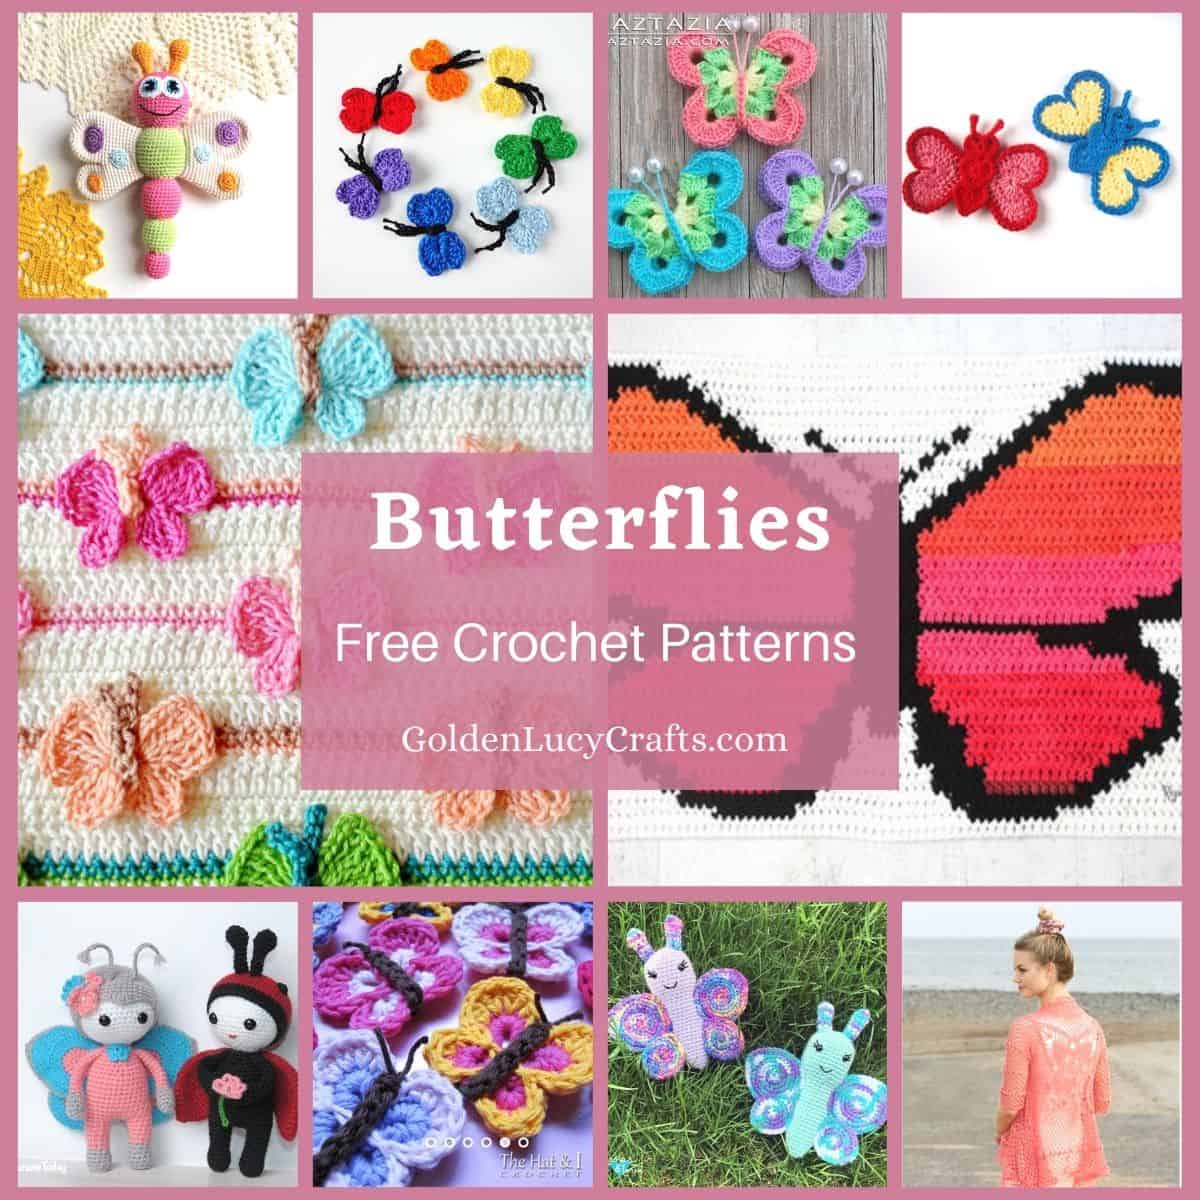 Photo collage crocheted butterflies.